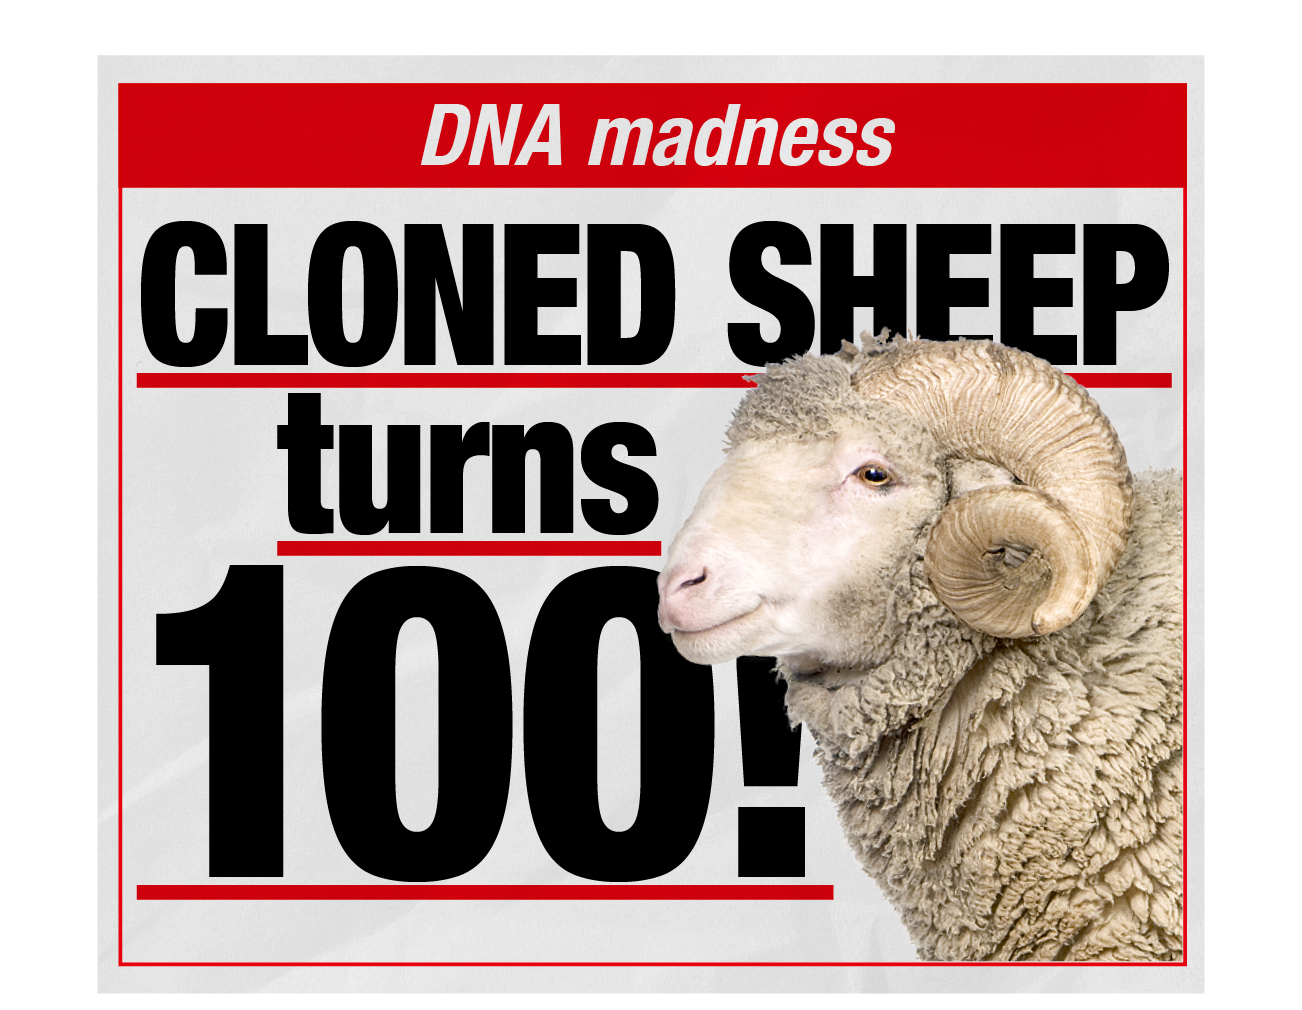 DNA madness: Cloned sheep turns 100!